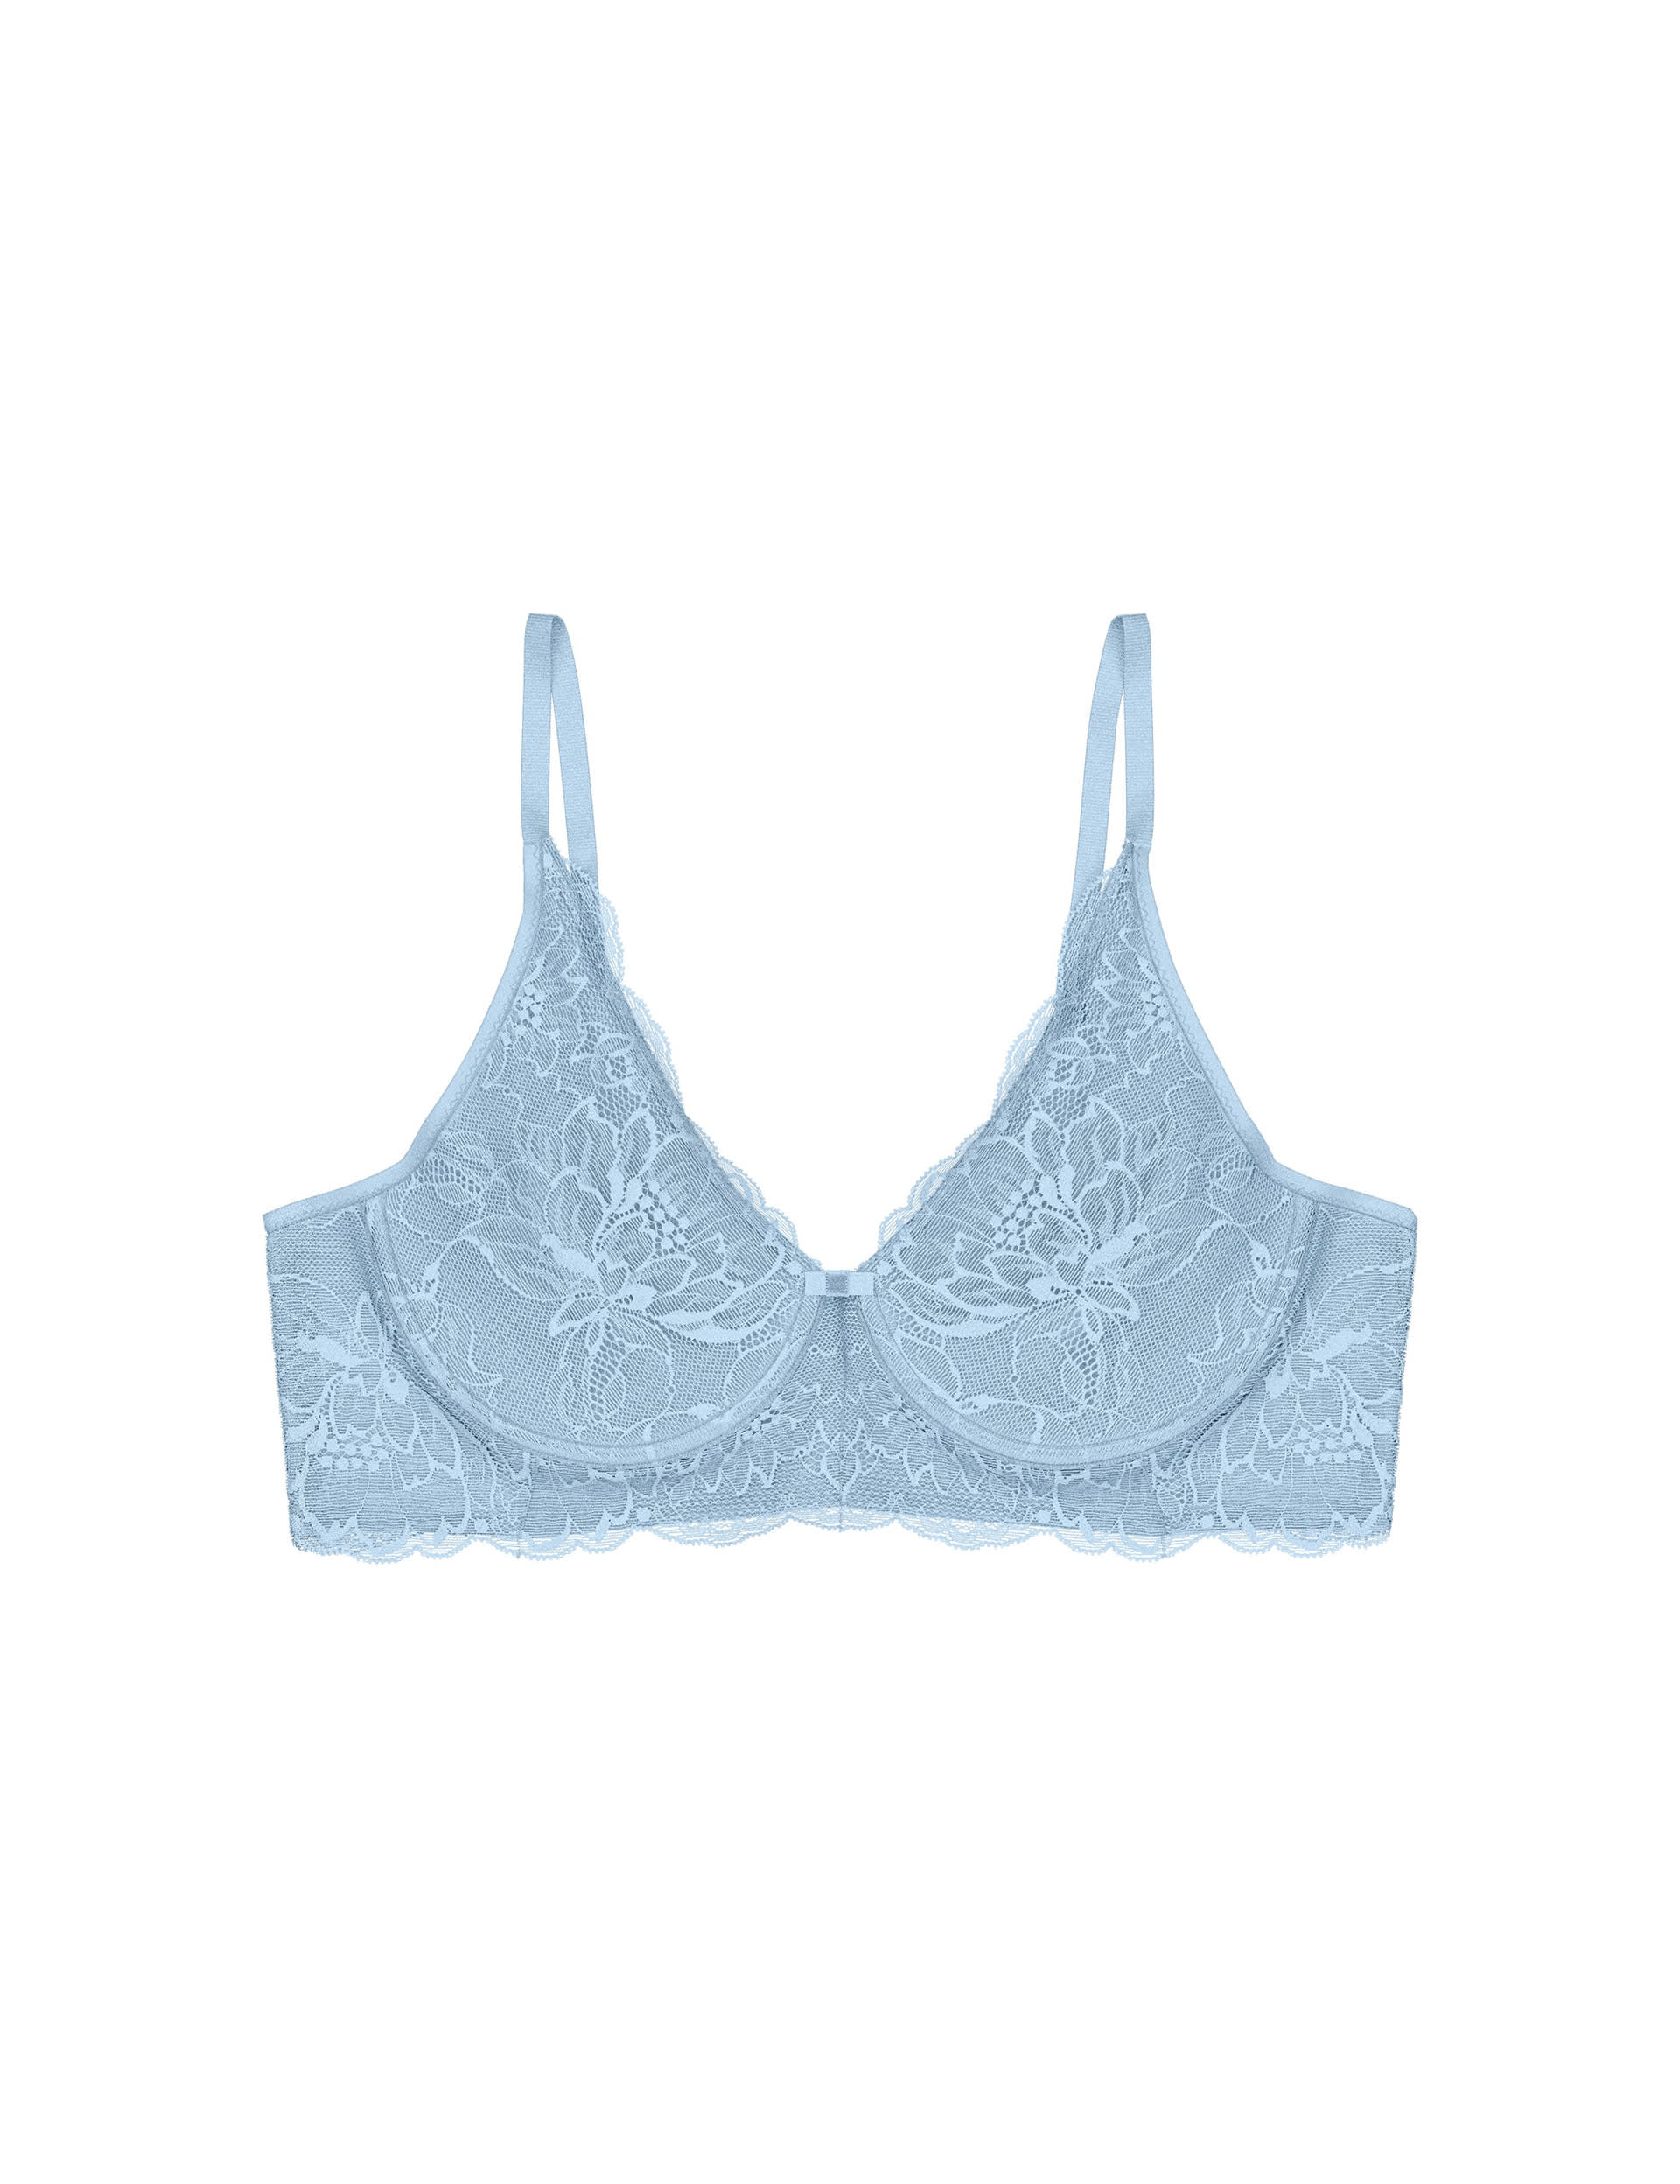 Amourette Charm Lace Wired Full Cup Bra